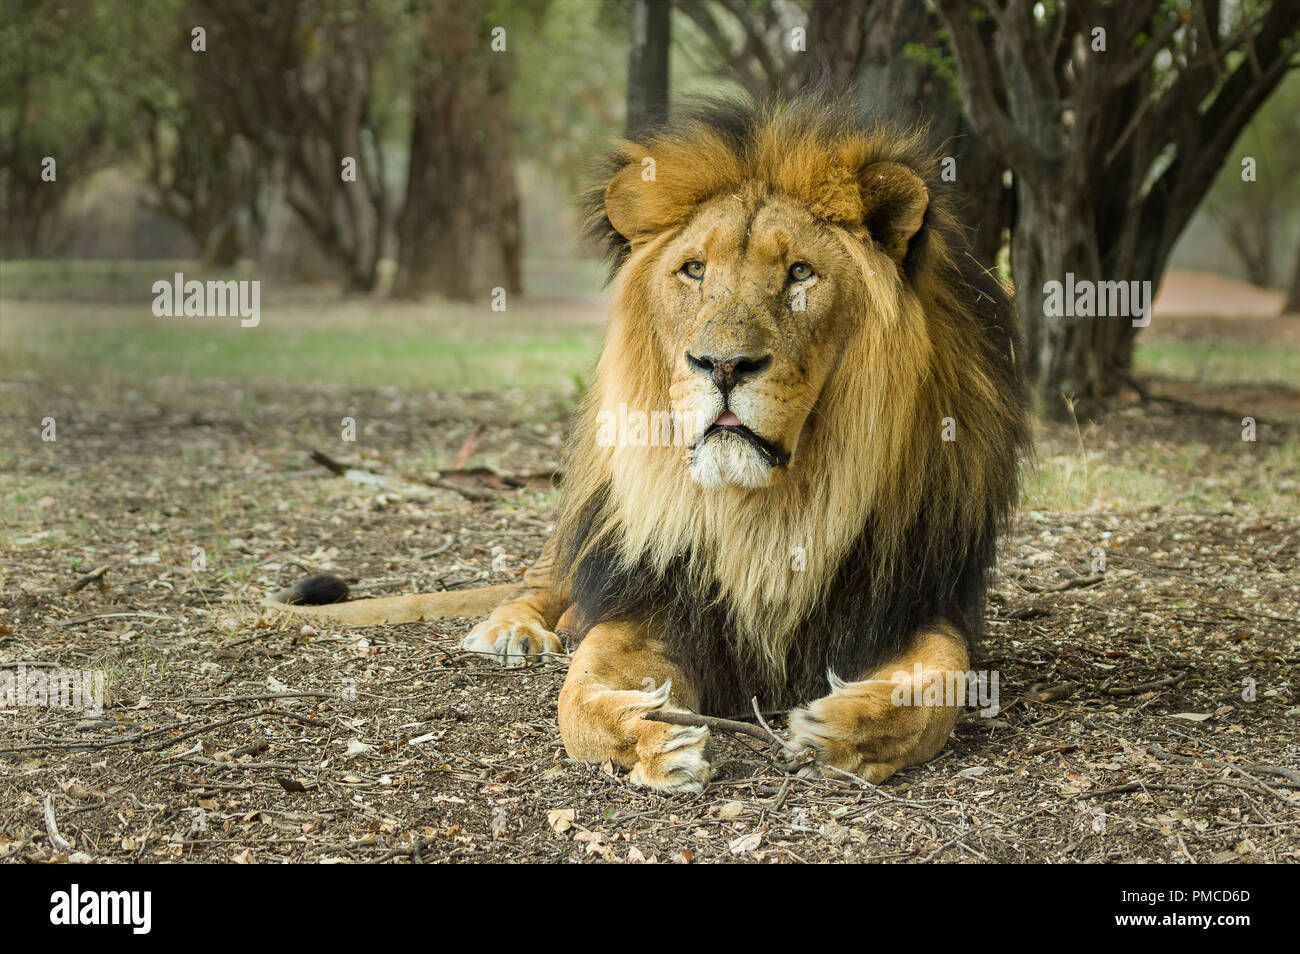 A lion resting Stock Photo